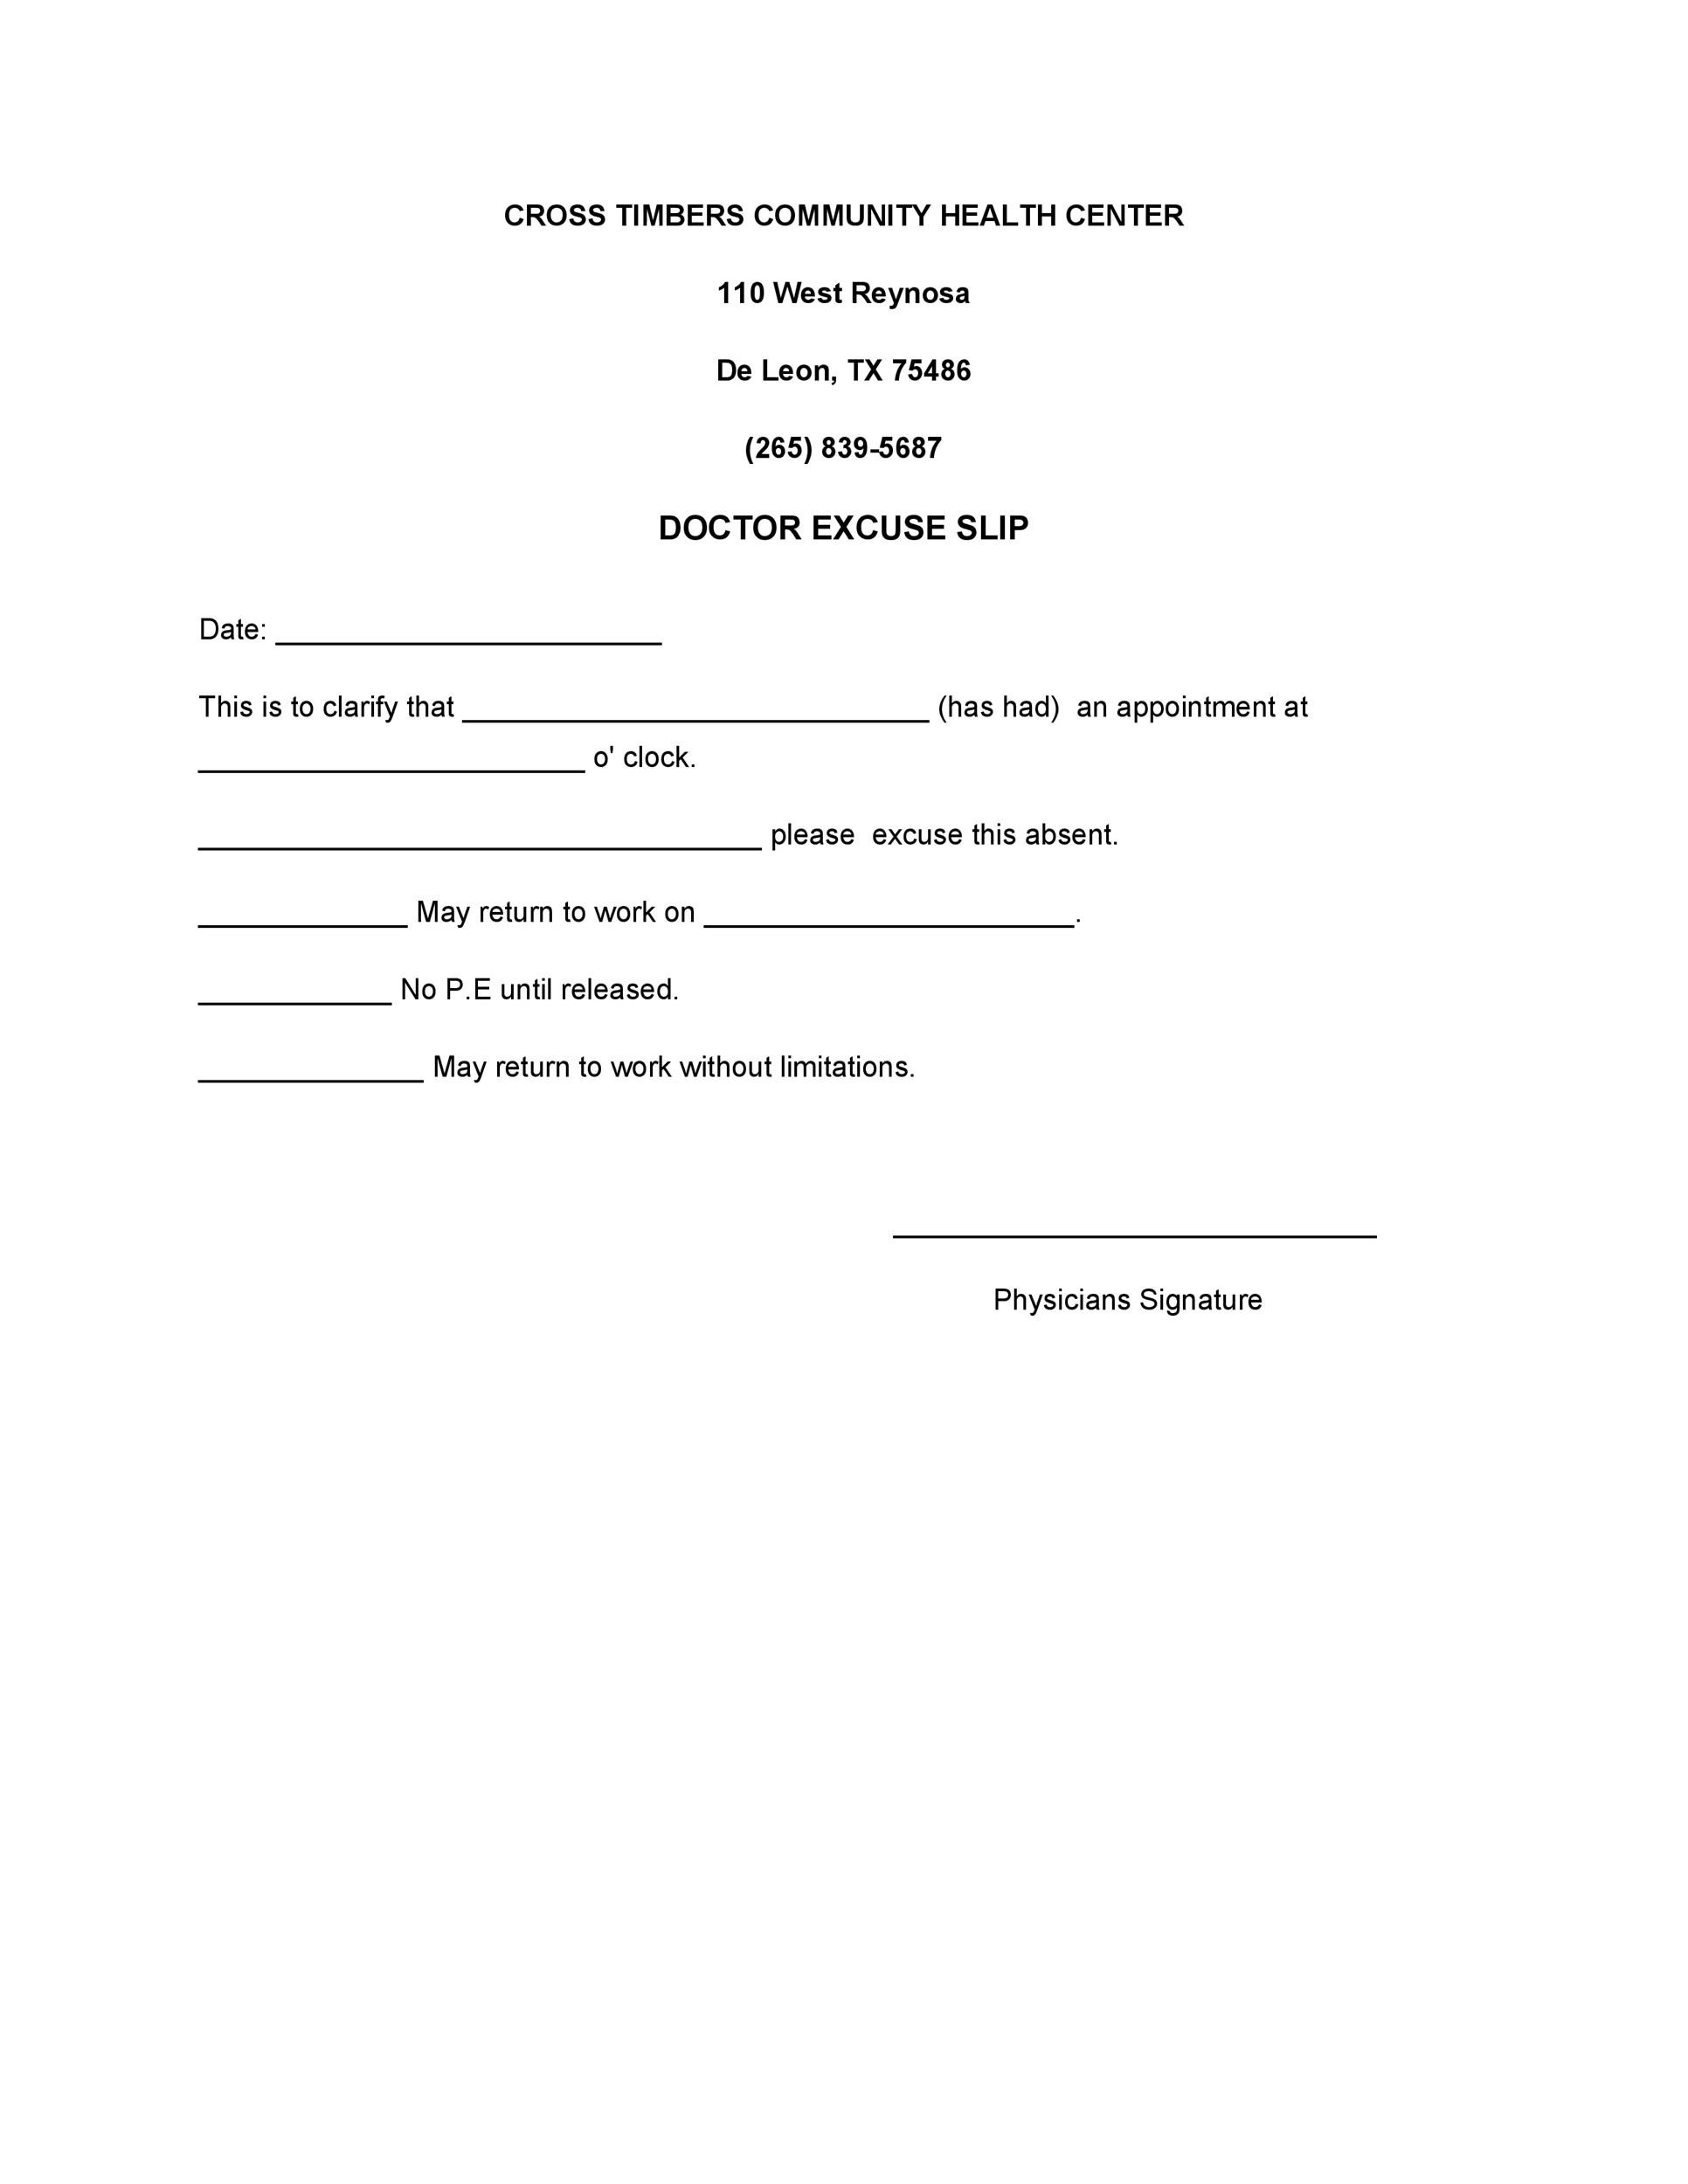 25 Free Doctor Note Excuse Templates Template Lab Doctors Note For Work